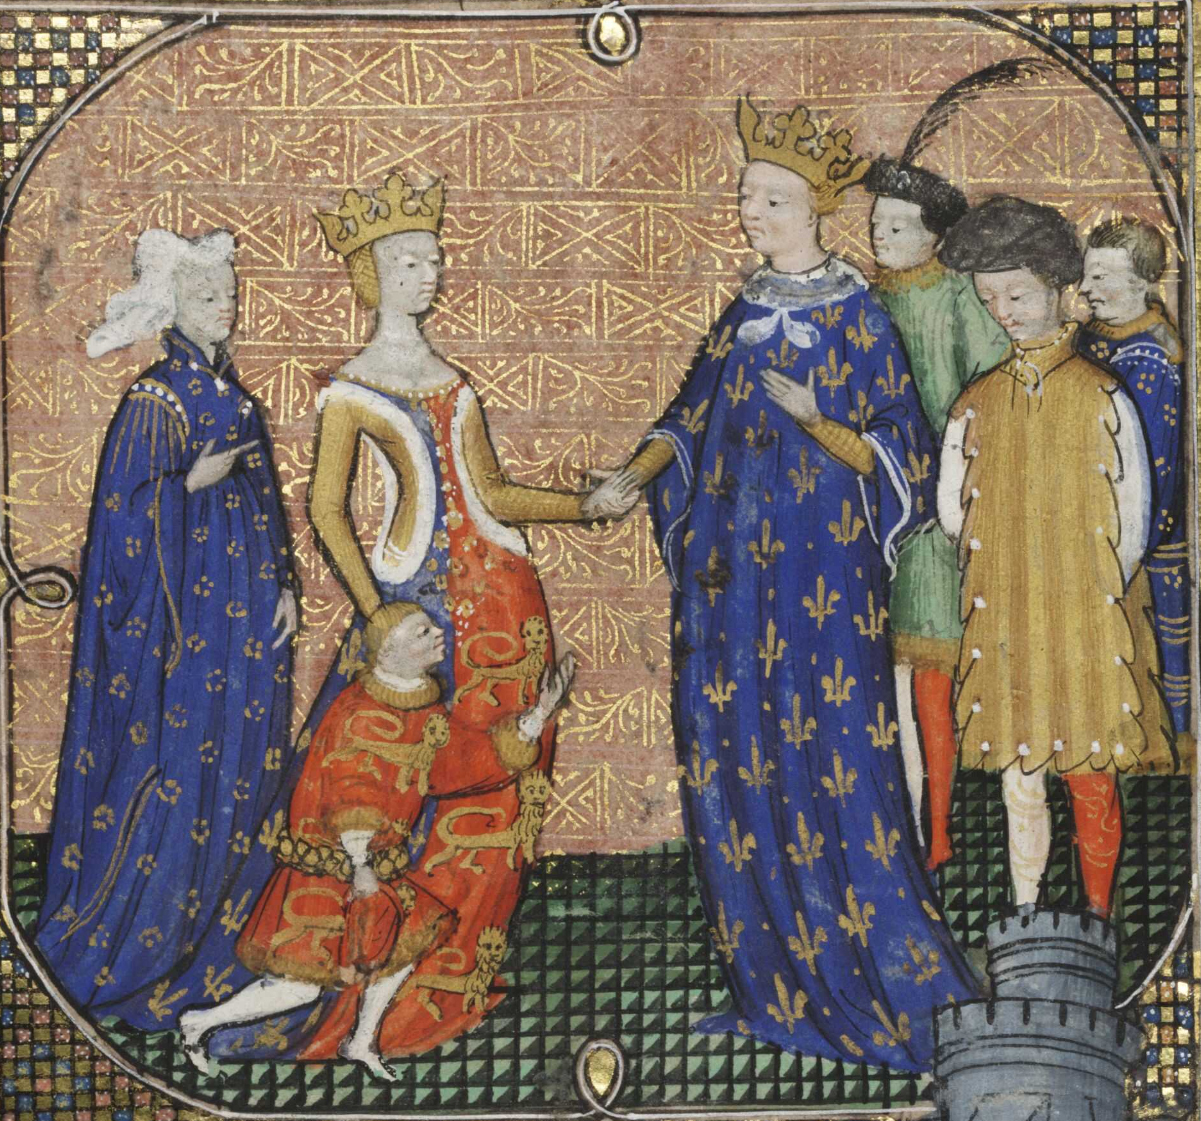 A near-contemporary miniature showing the future Edward III giving homage to Charles IV of France under the guidance of Edward's mother, and Charles' sister, Isabella, in 1325[64]